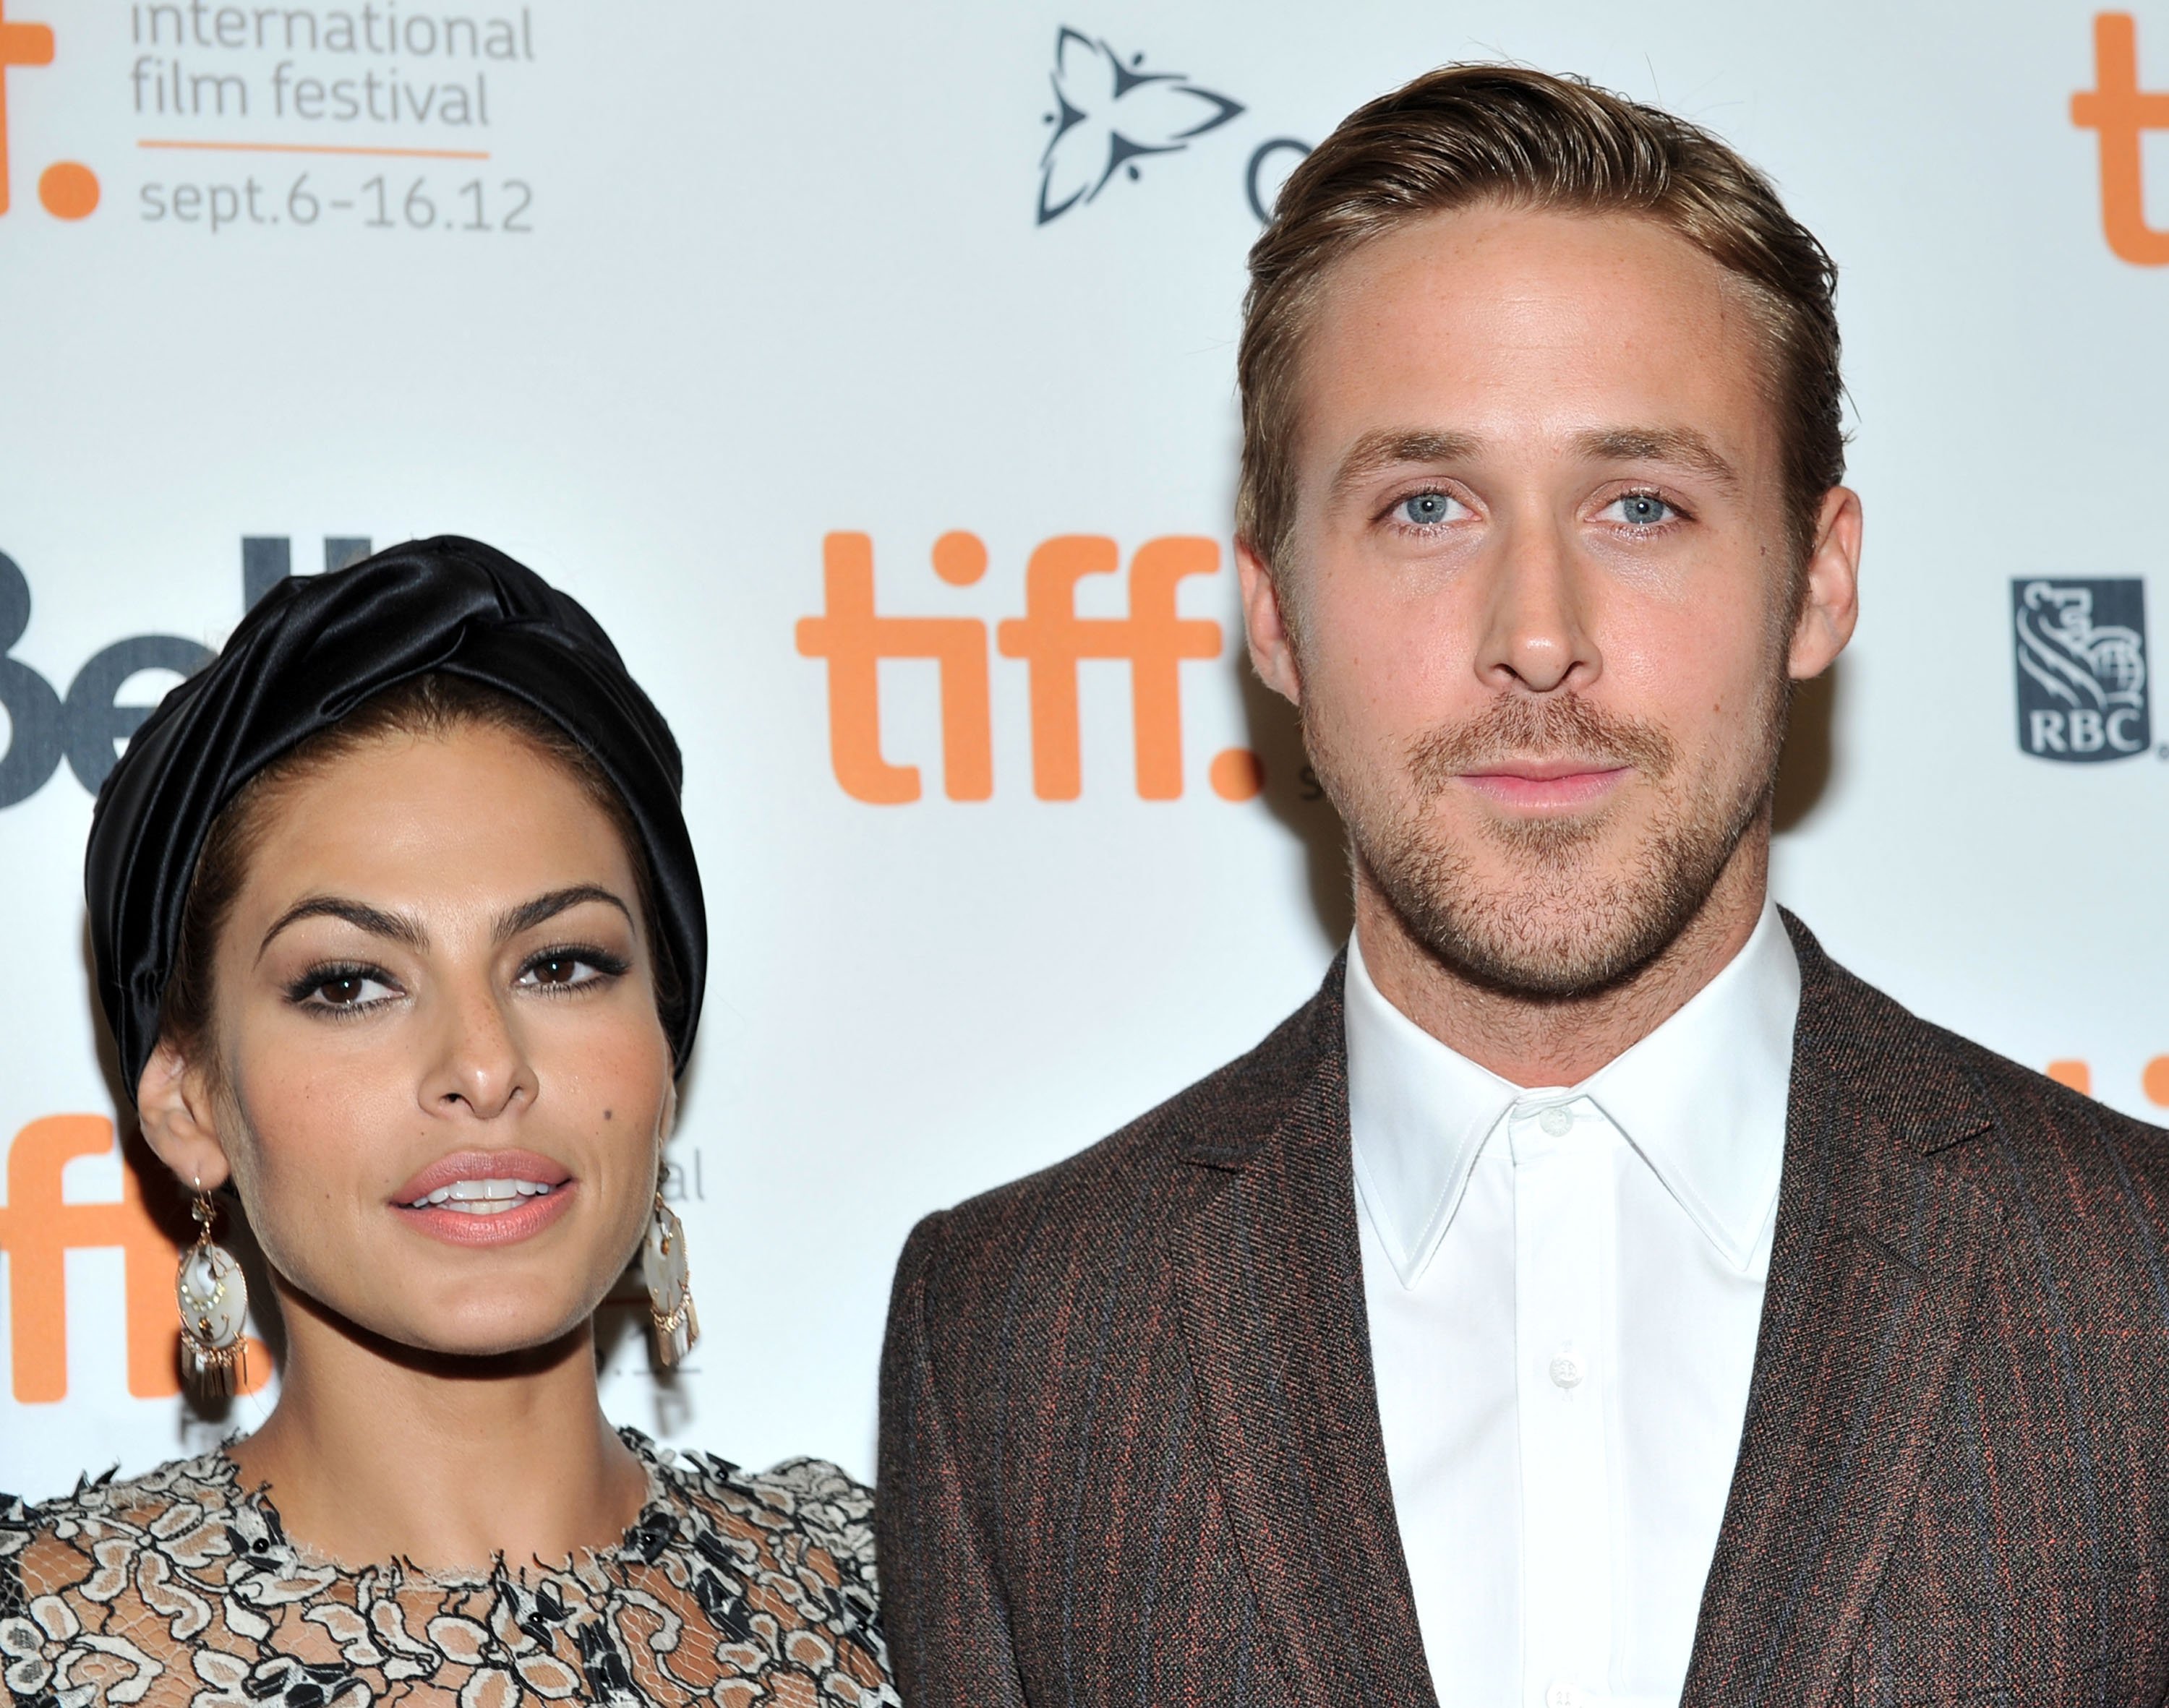 Actors Smiling Eva Mendes and Ryan Gosling attend 'The Place Beyond The Pines' premiere during the 2012 Toronto International Film Festival 